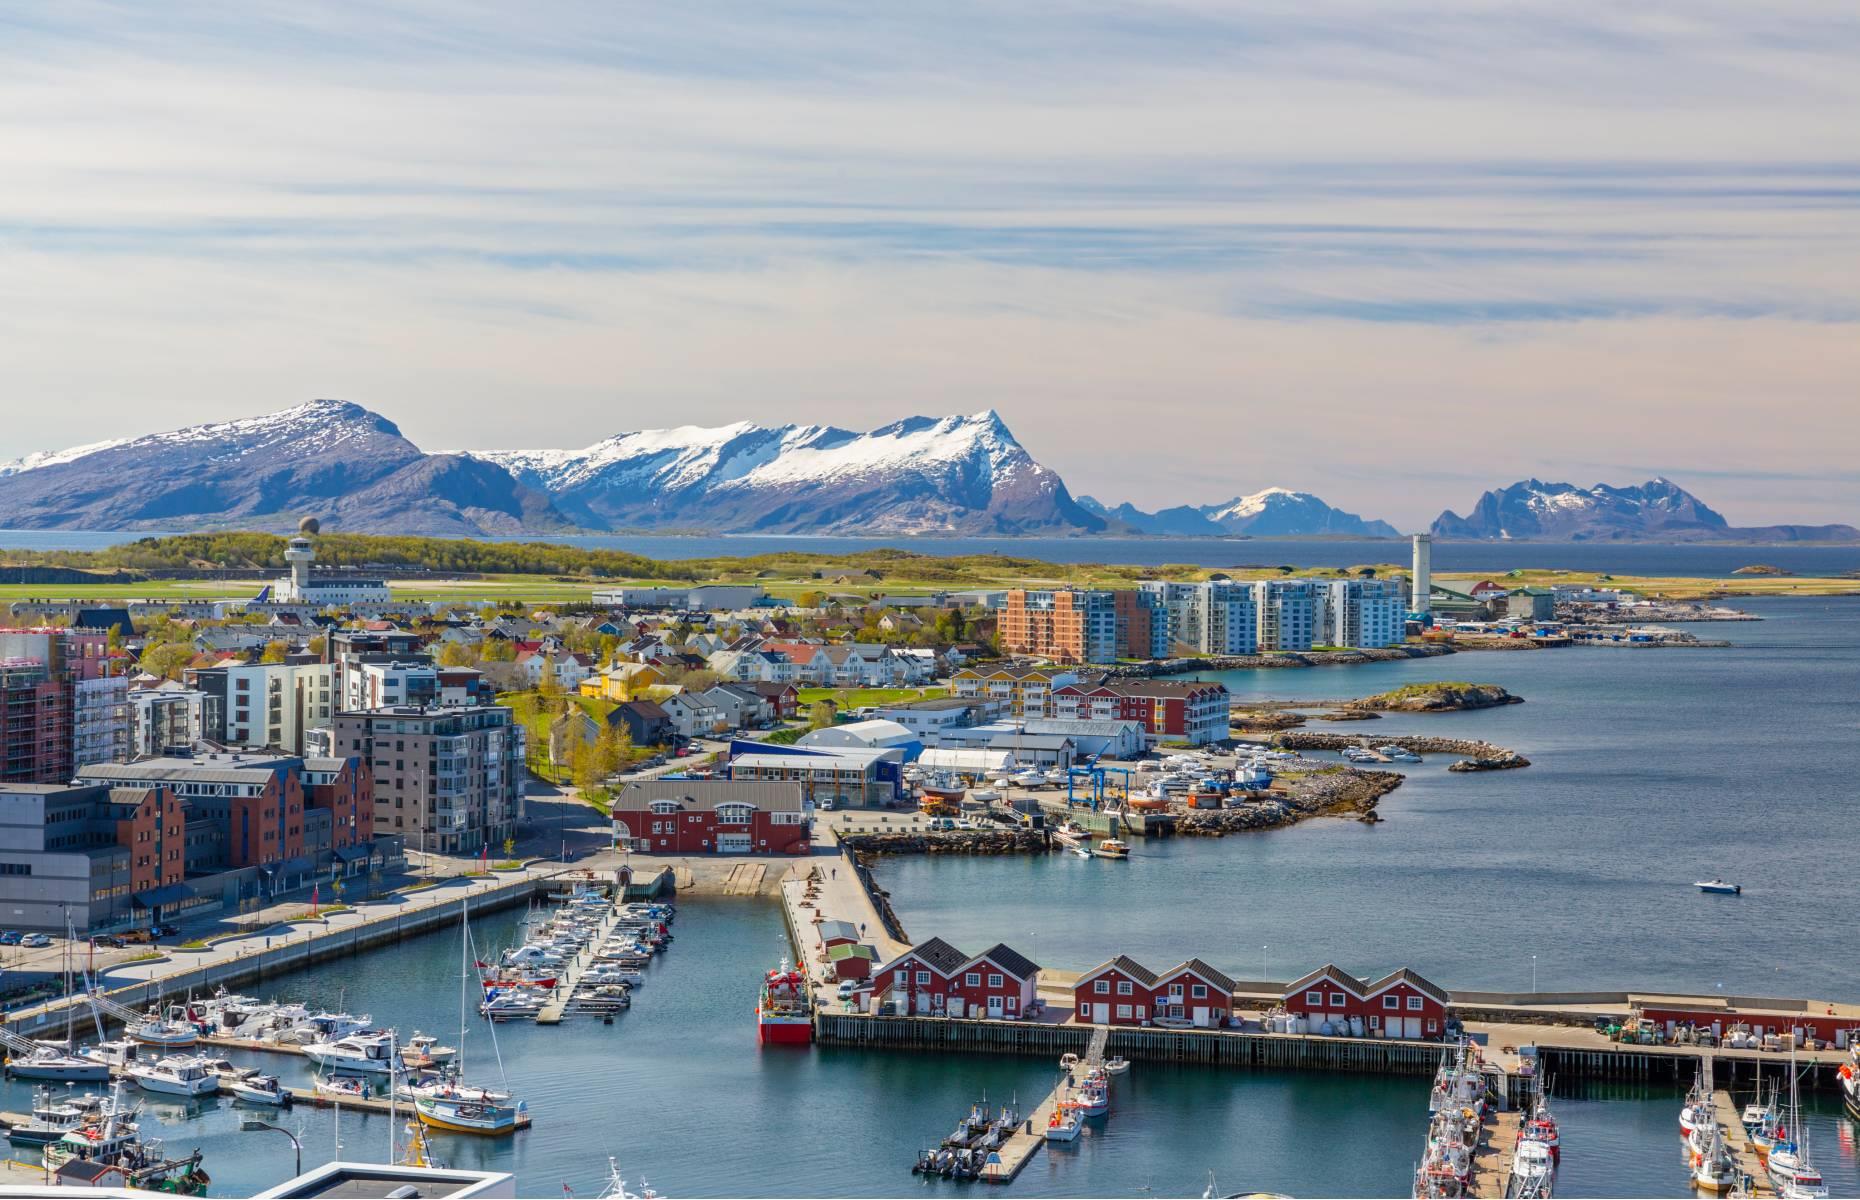 <p>Every year, a select few cities across Europe hold the coveted 'European Capital of Culture' title, becoming pop-up venues for some of the planet's most creative performers, artists and writers. Bodo – a small city in the north of Norway – is one of 2024's picks. The only city north of the Arctic Circle to ever hold the title, Bodo will be transformed by more than 1,000 events across the year, ranging from theatrical trilogies about Sami reindeer husbandry to 360-degree immersive films.</p>